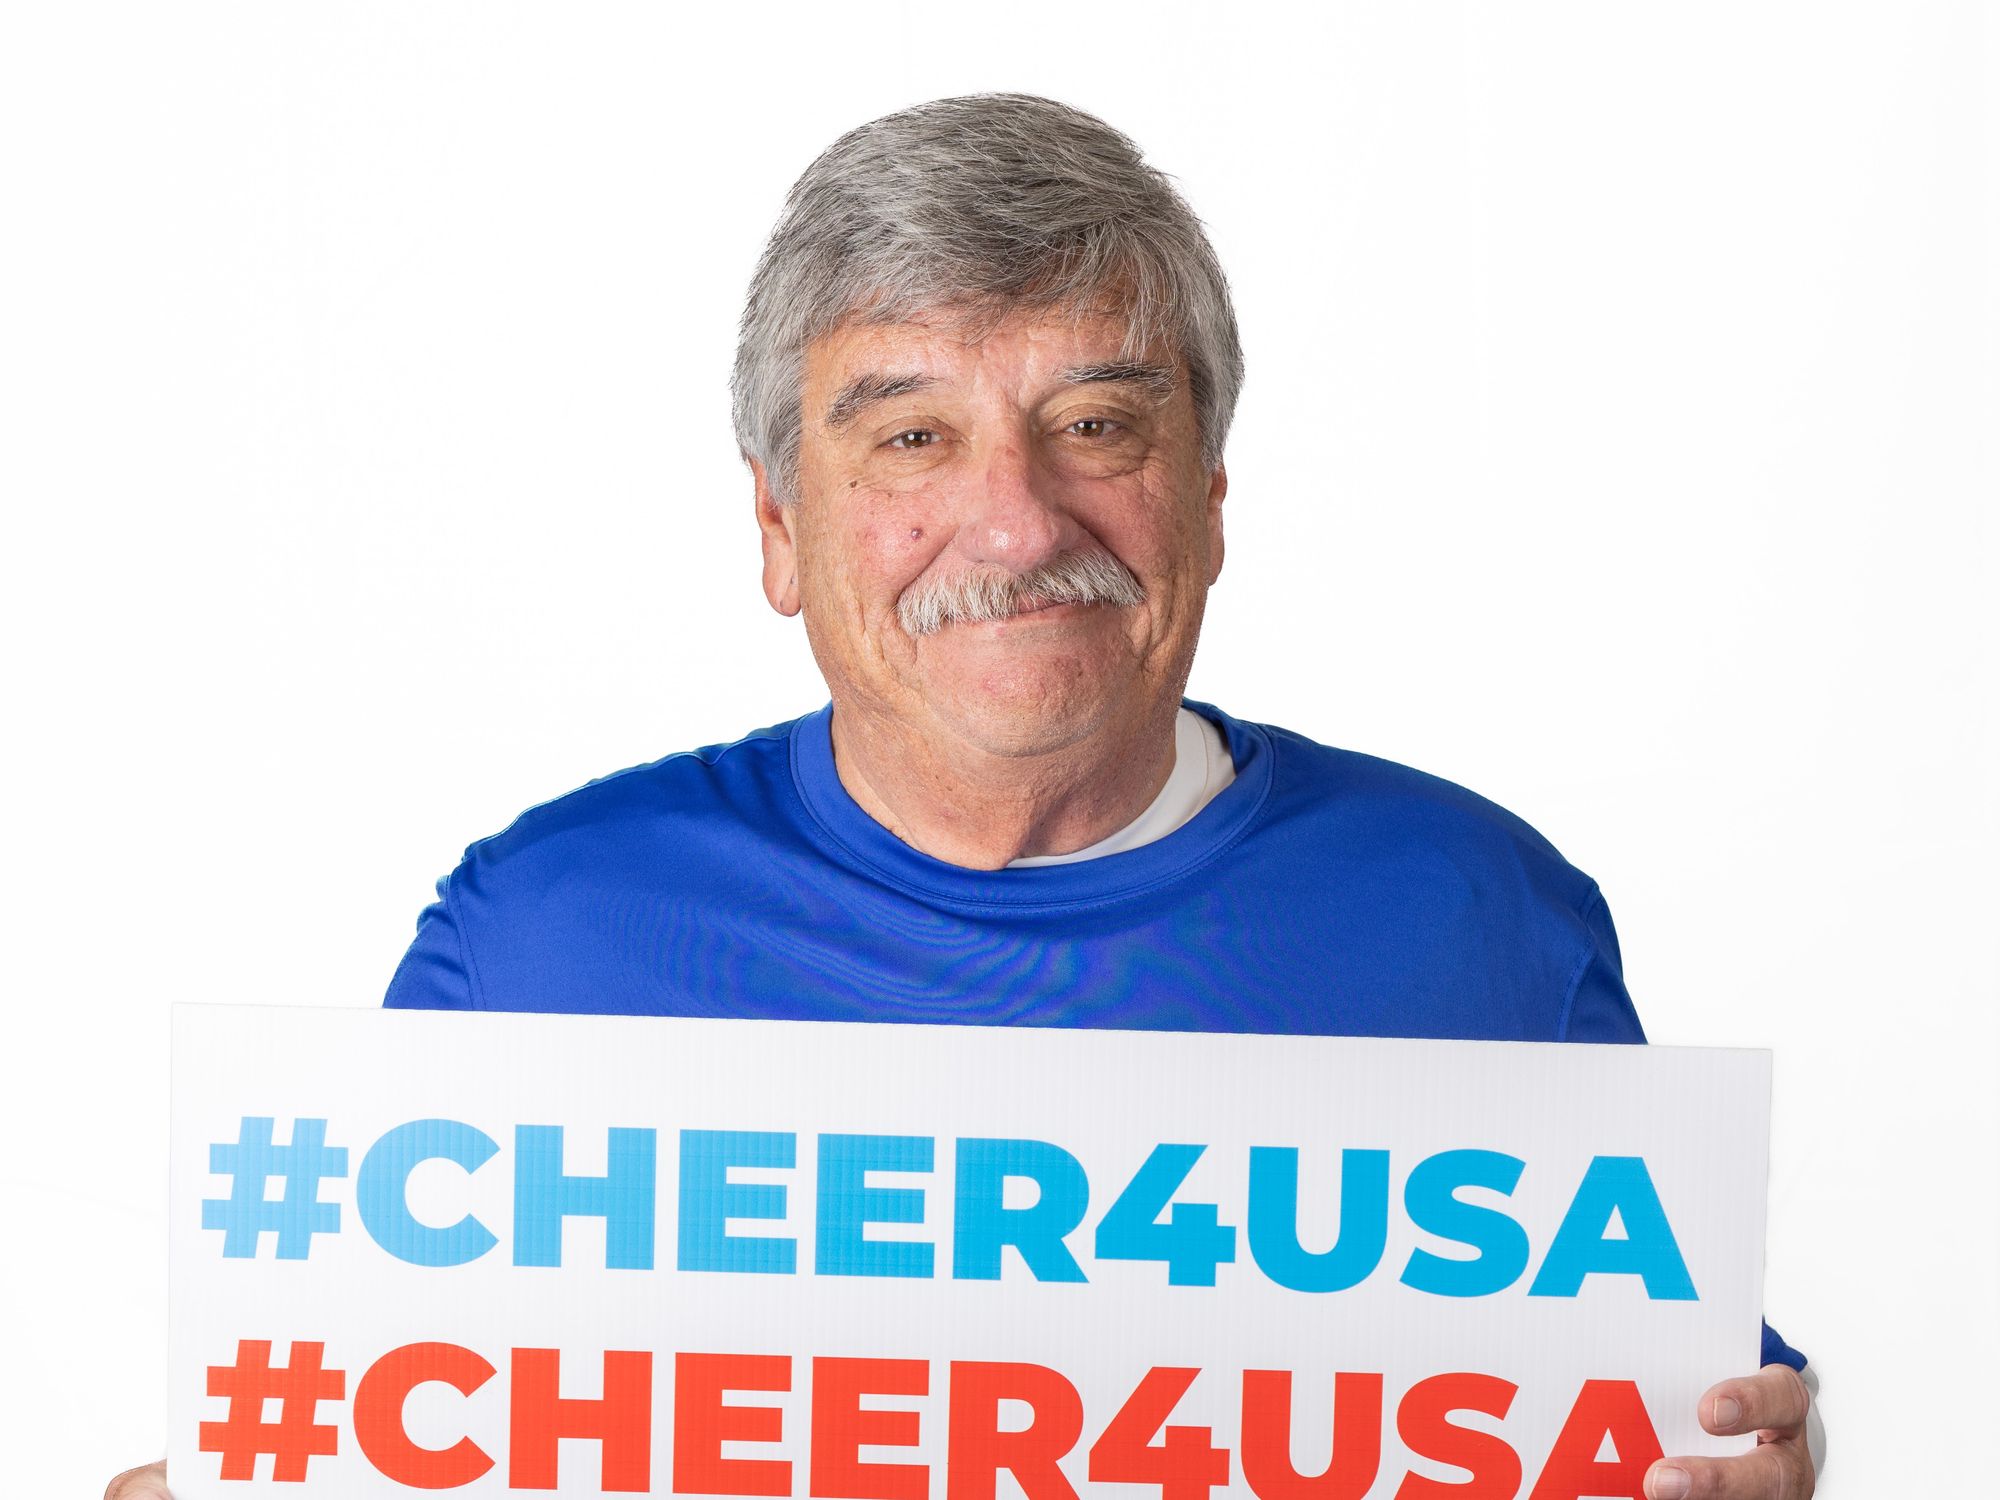 The Head Coach of the Texas Special Olympics Sailing team holding a #CHEER4USA sign